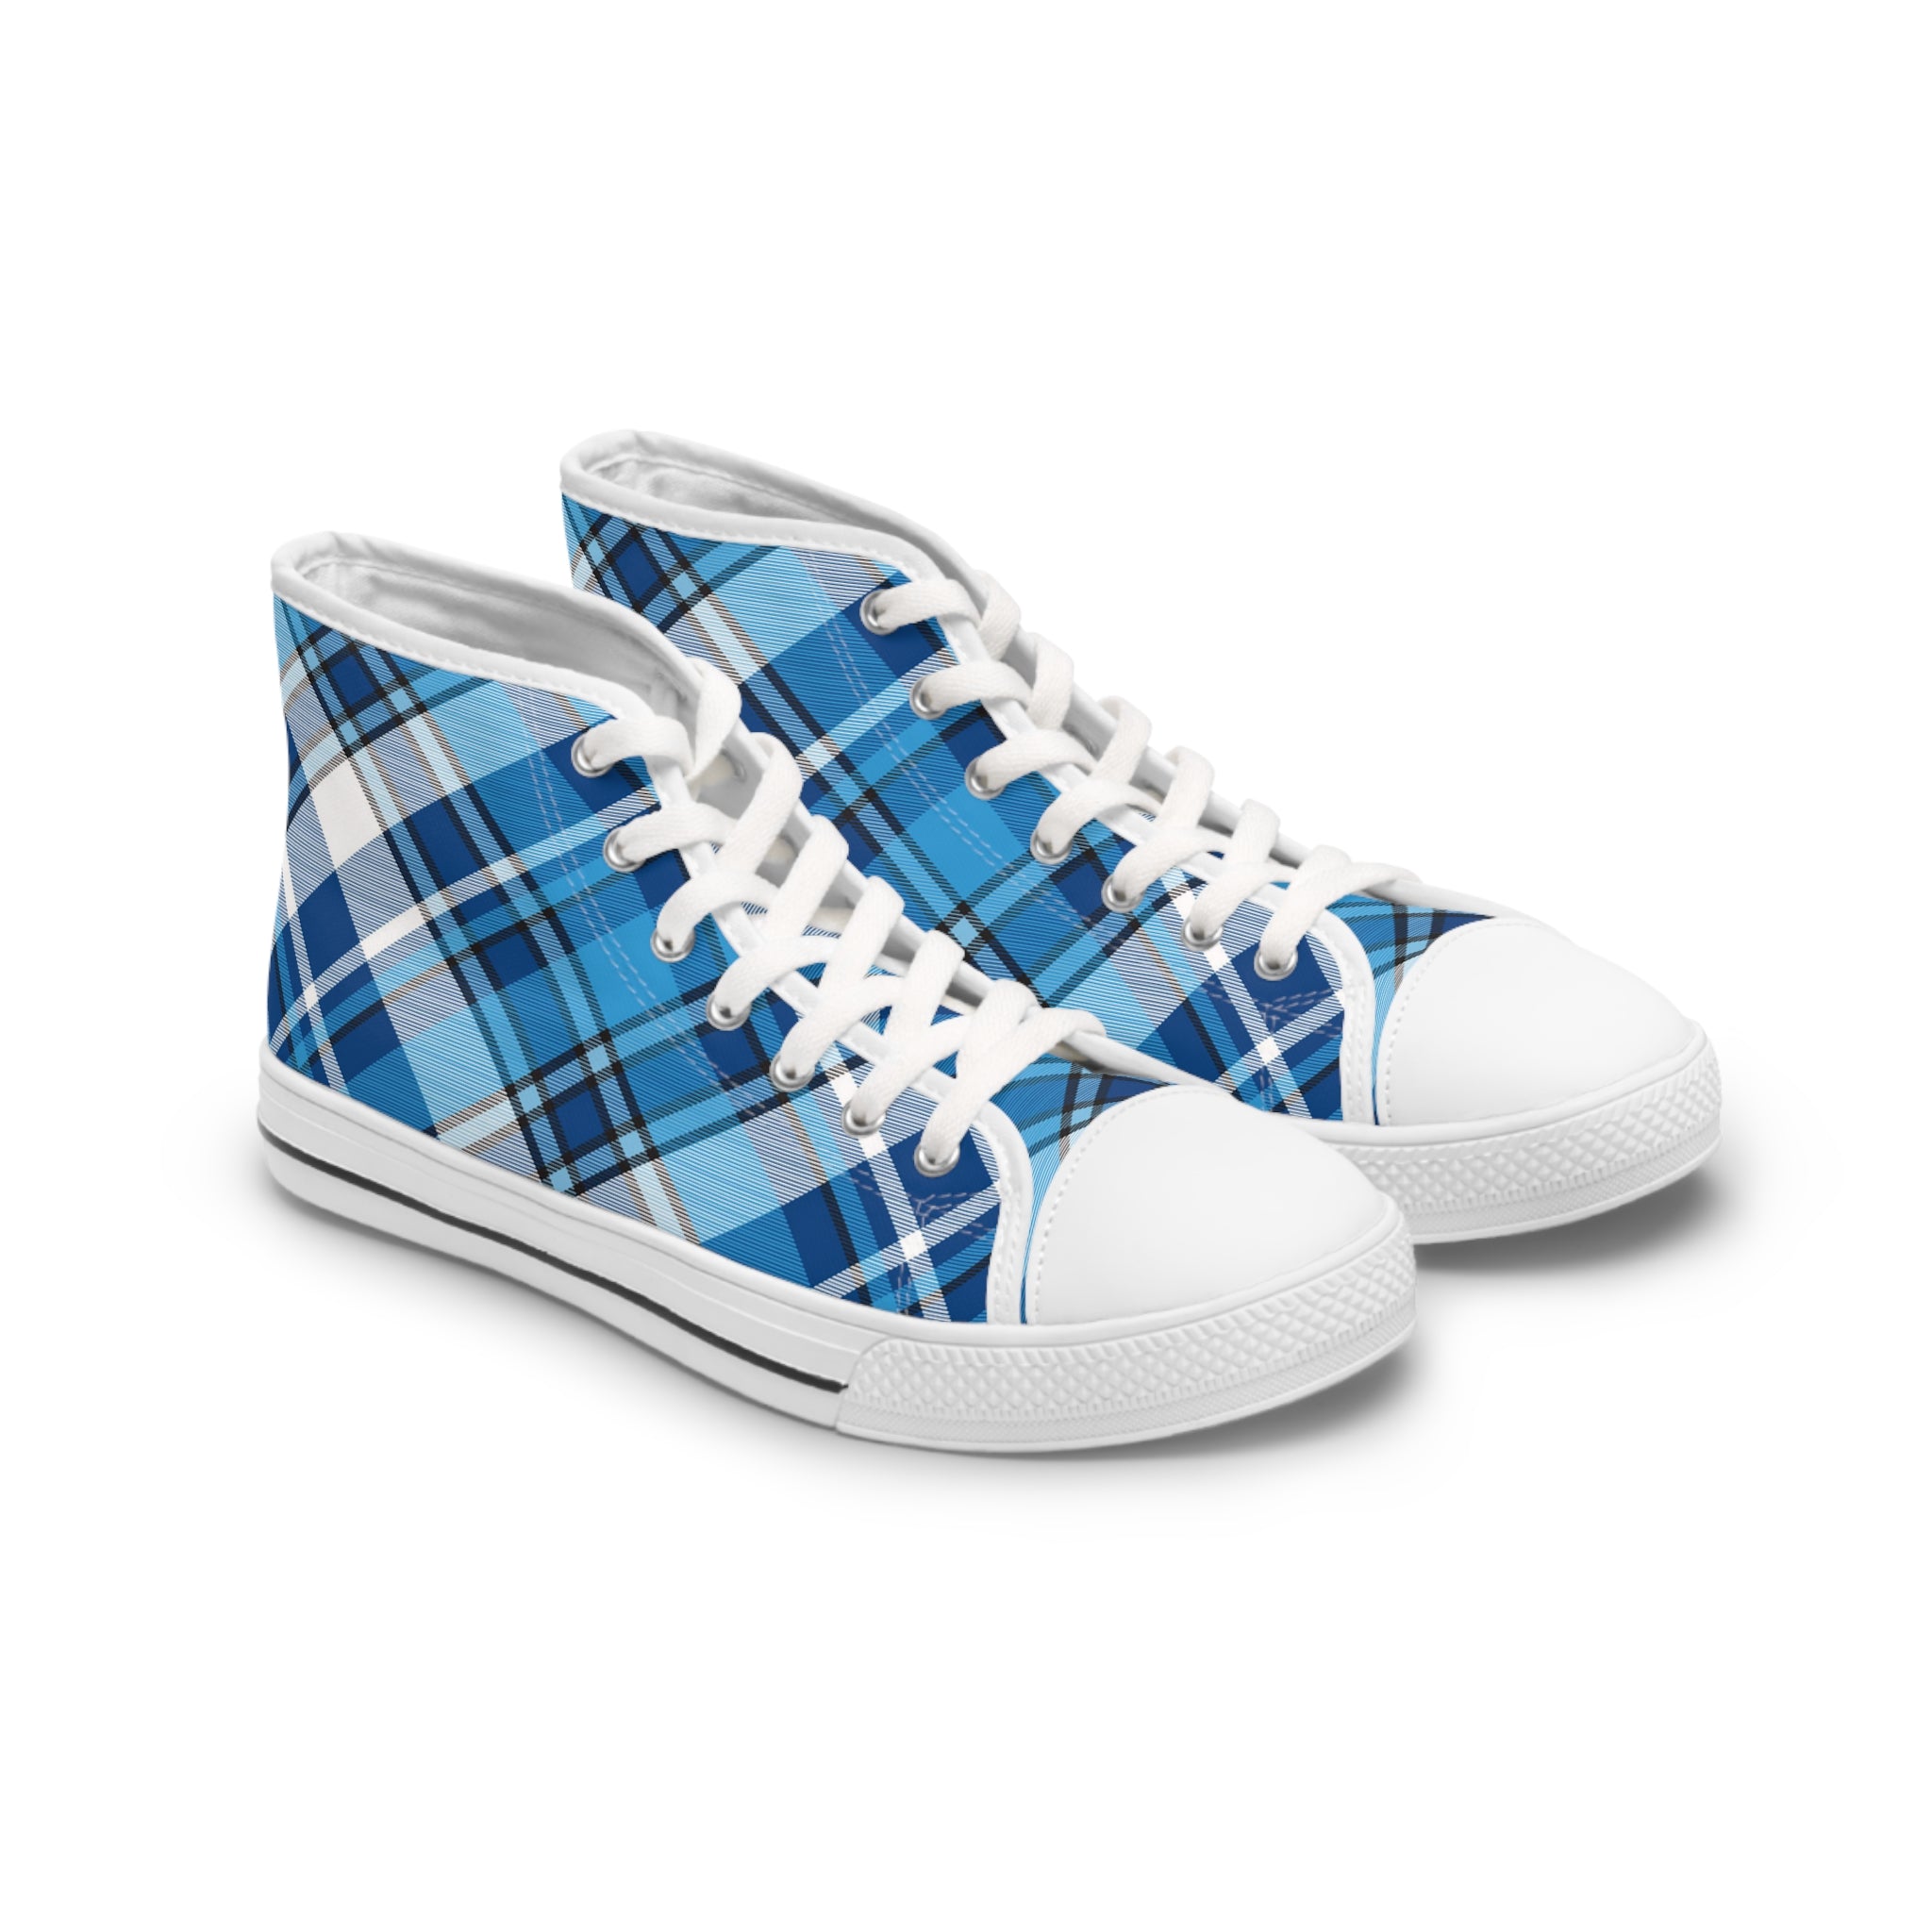 Groove Fashion Collection in Blue Plaid Women's High Top Sneakers, Unique Women's Shoes, Casual High Tops, Fashionable Women's Sneakers Shoes US-12-White-sole The Middle Aged Groove